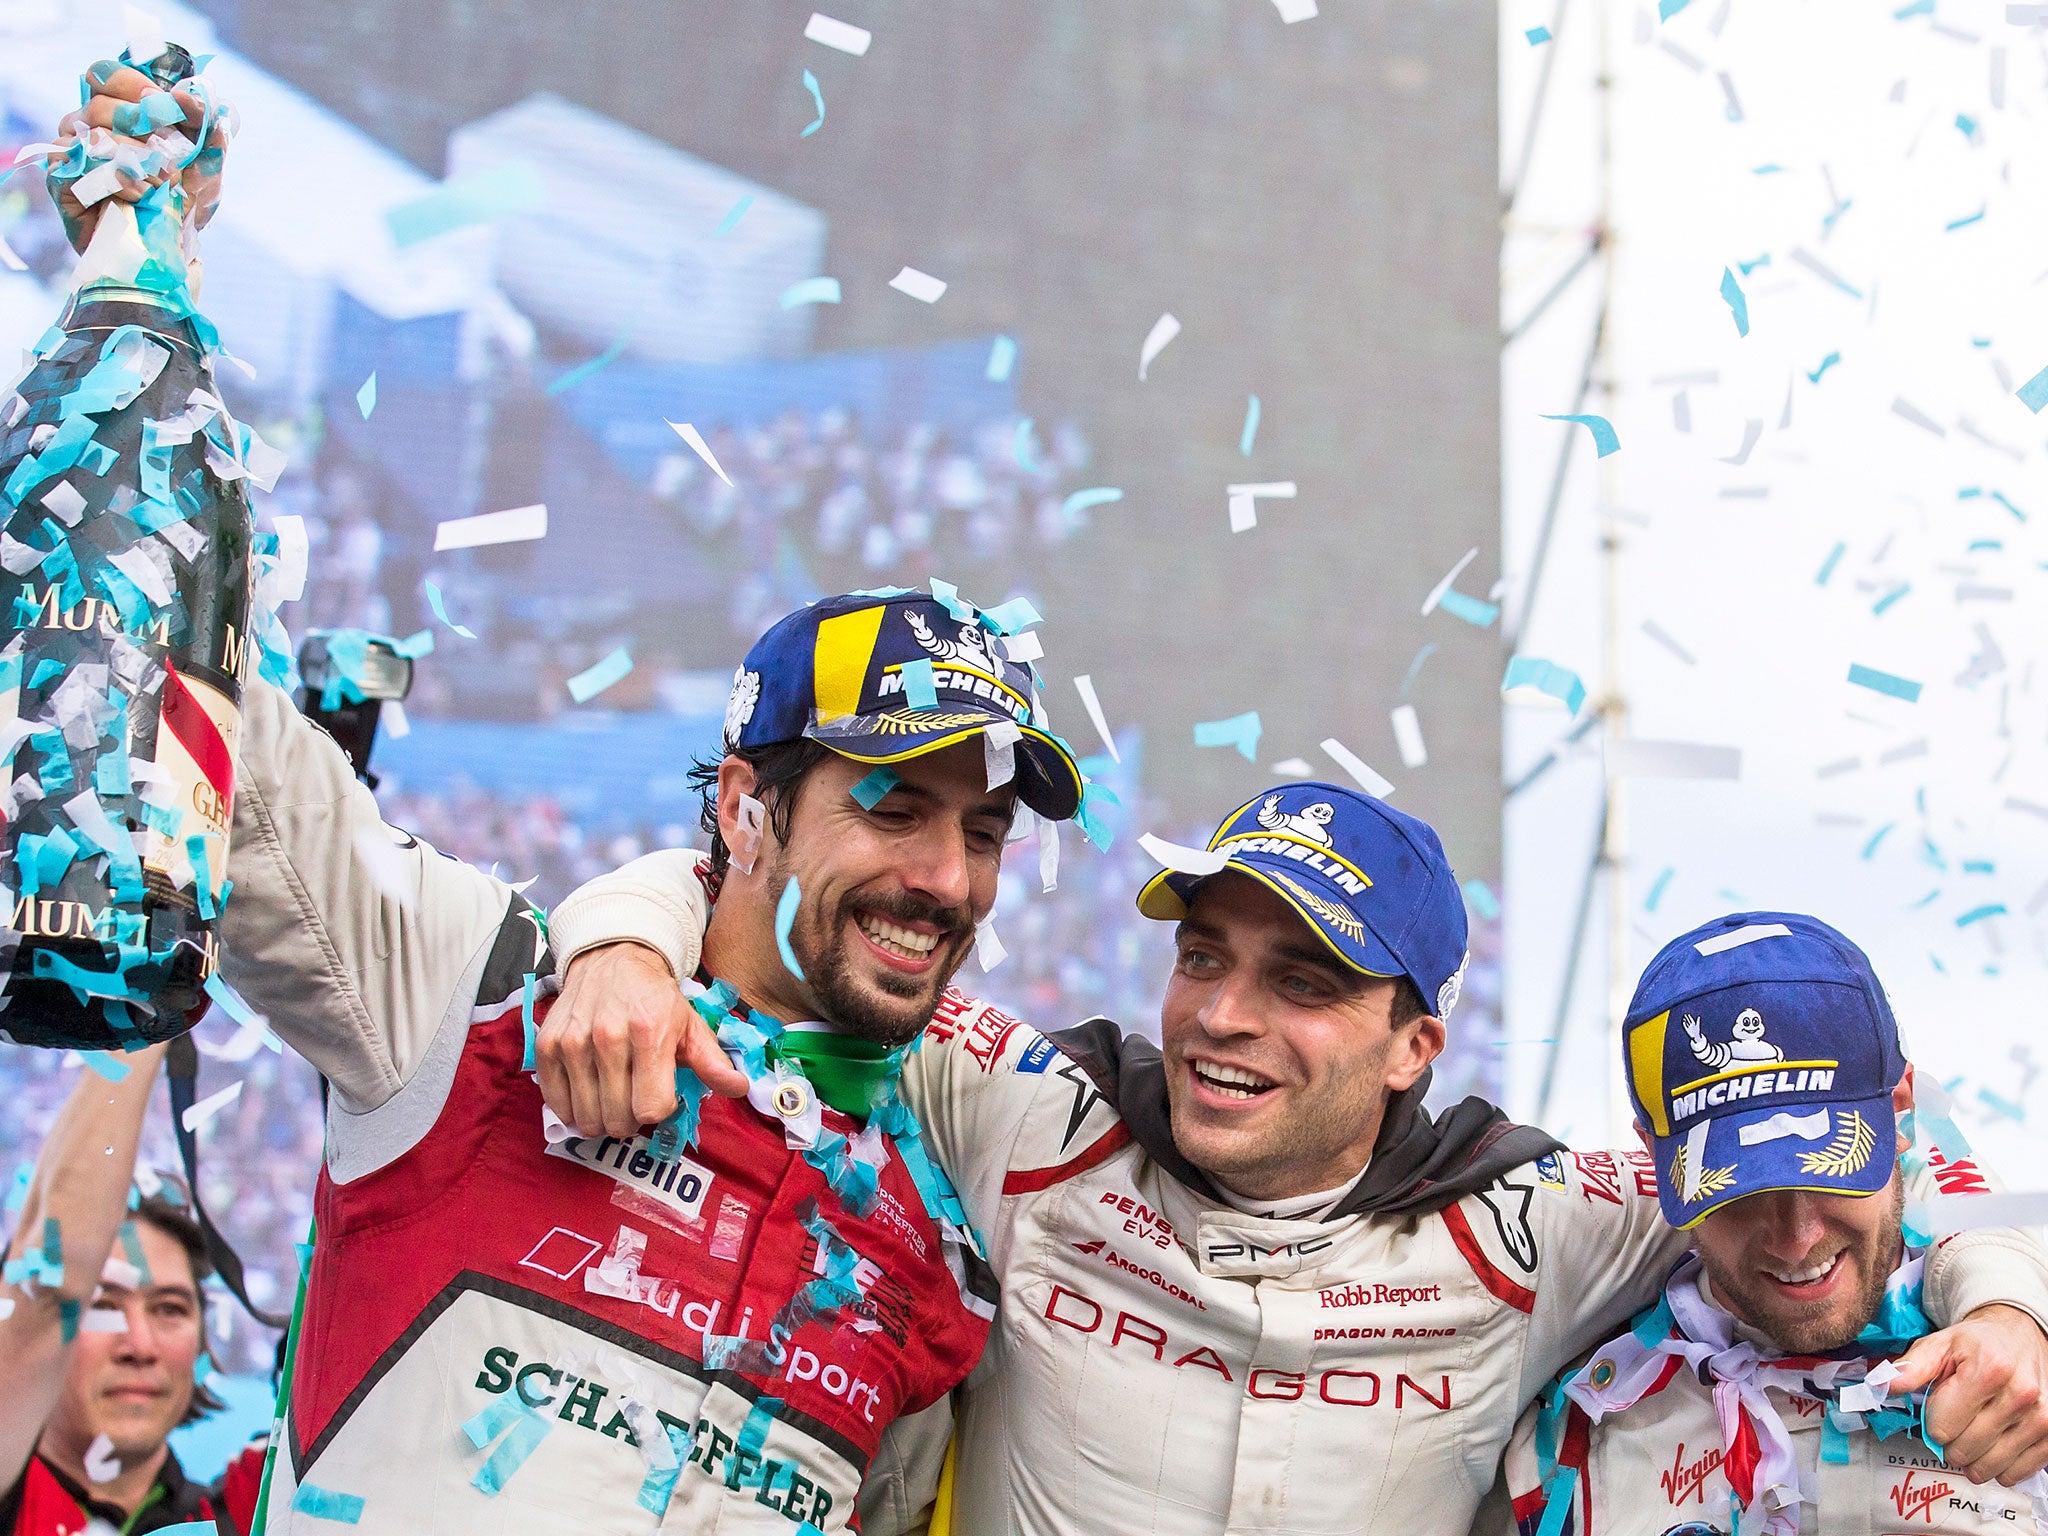 Lucas di Grassi claimed victory in Switzerland, with Sam Bird in second